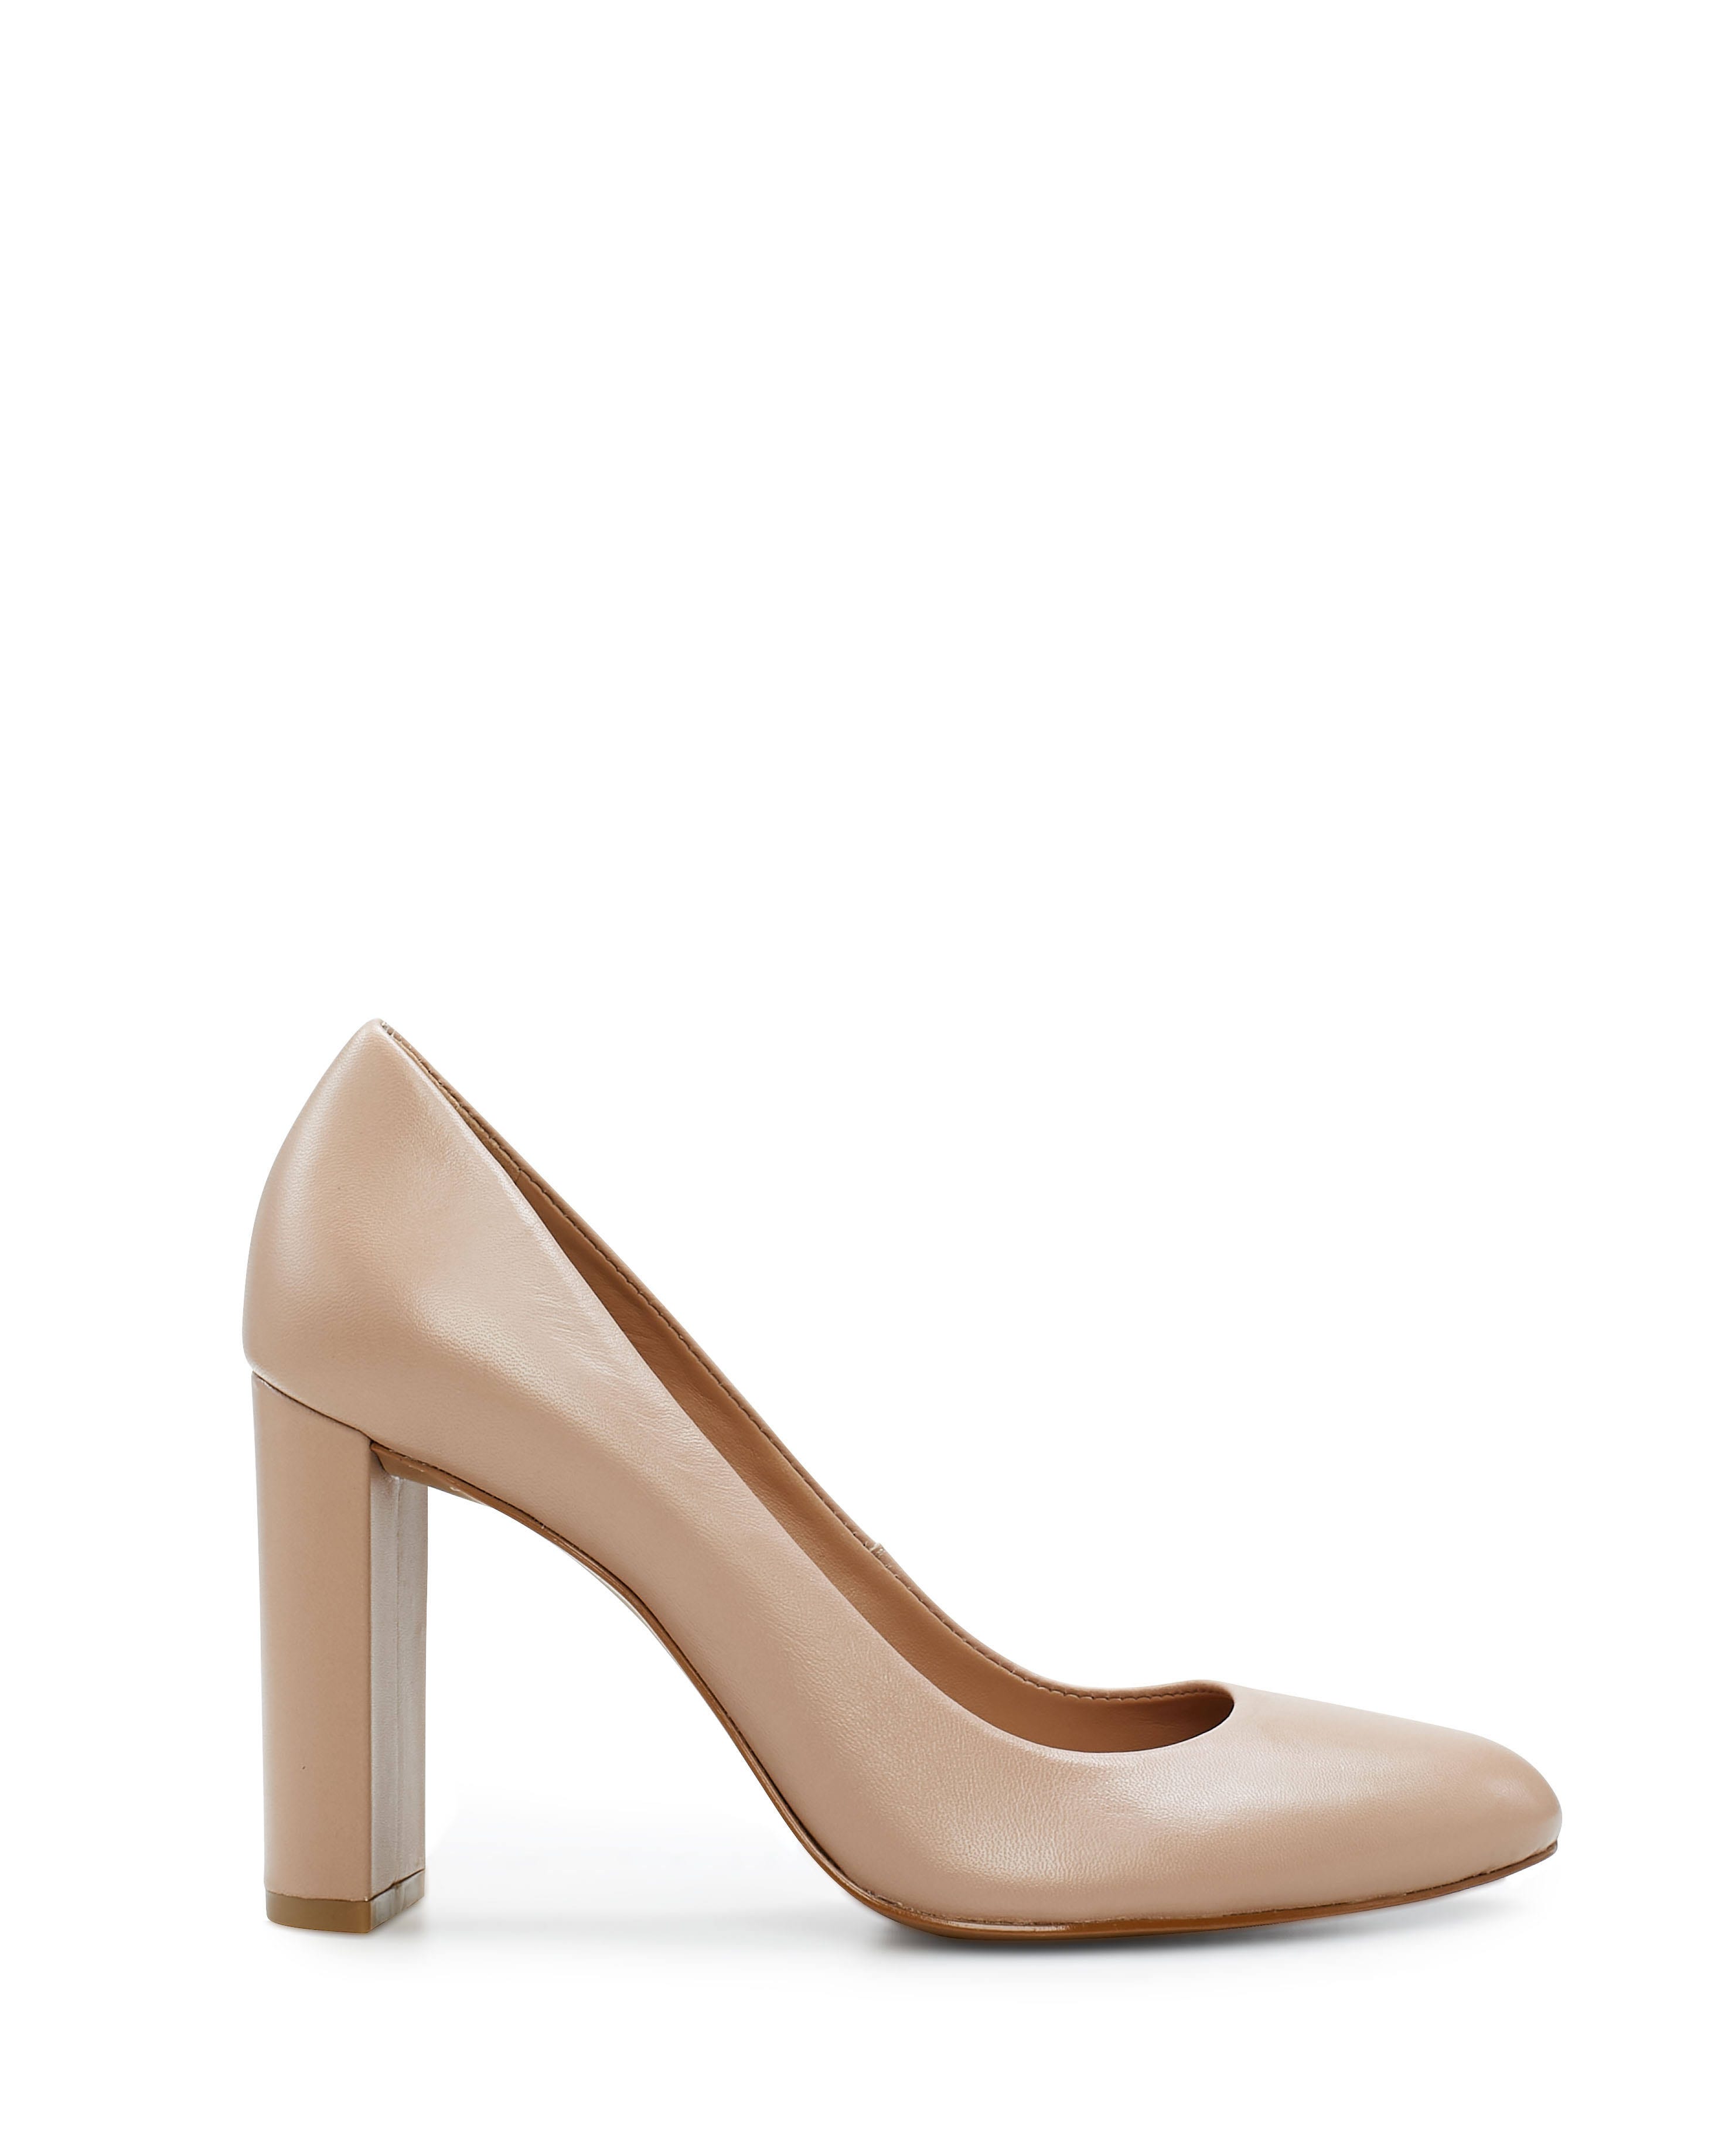 Stylish Leather Desimmy Pumps for Women - Tan Closed Toe Heels with Pull-On Closure | Image